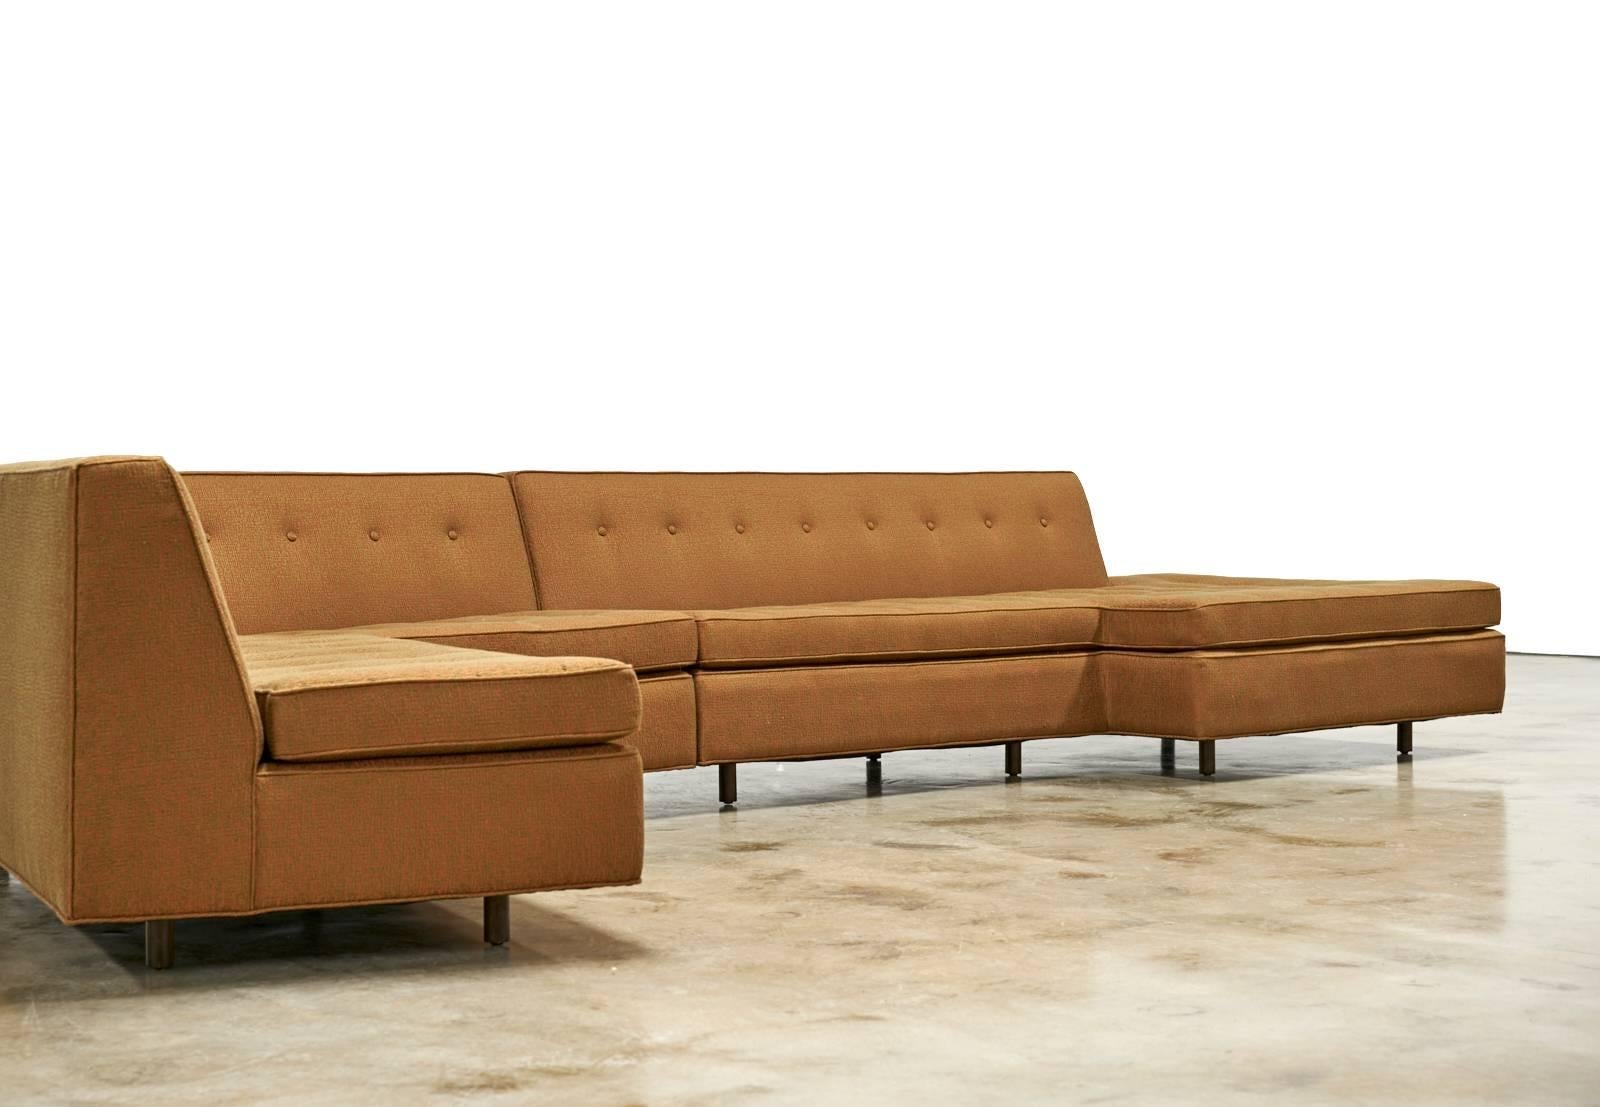 Two-piece sectional by Harvey Probber

USA, 1960s

Measures: 184 W x 84 D x 28.5 H in

Newly upholstered, wood frame.